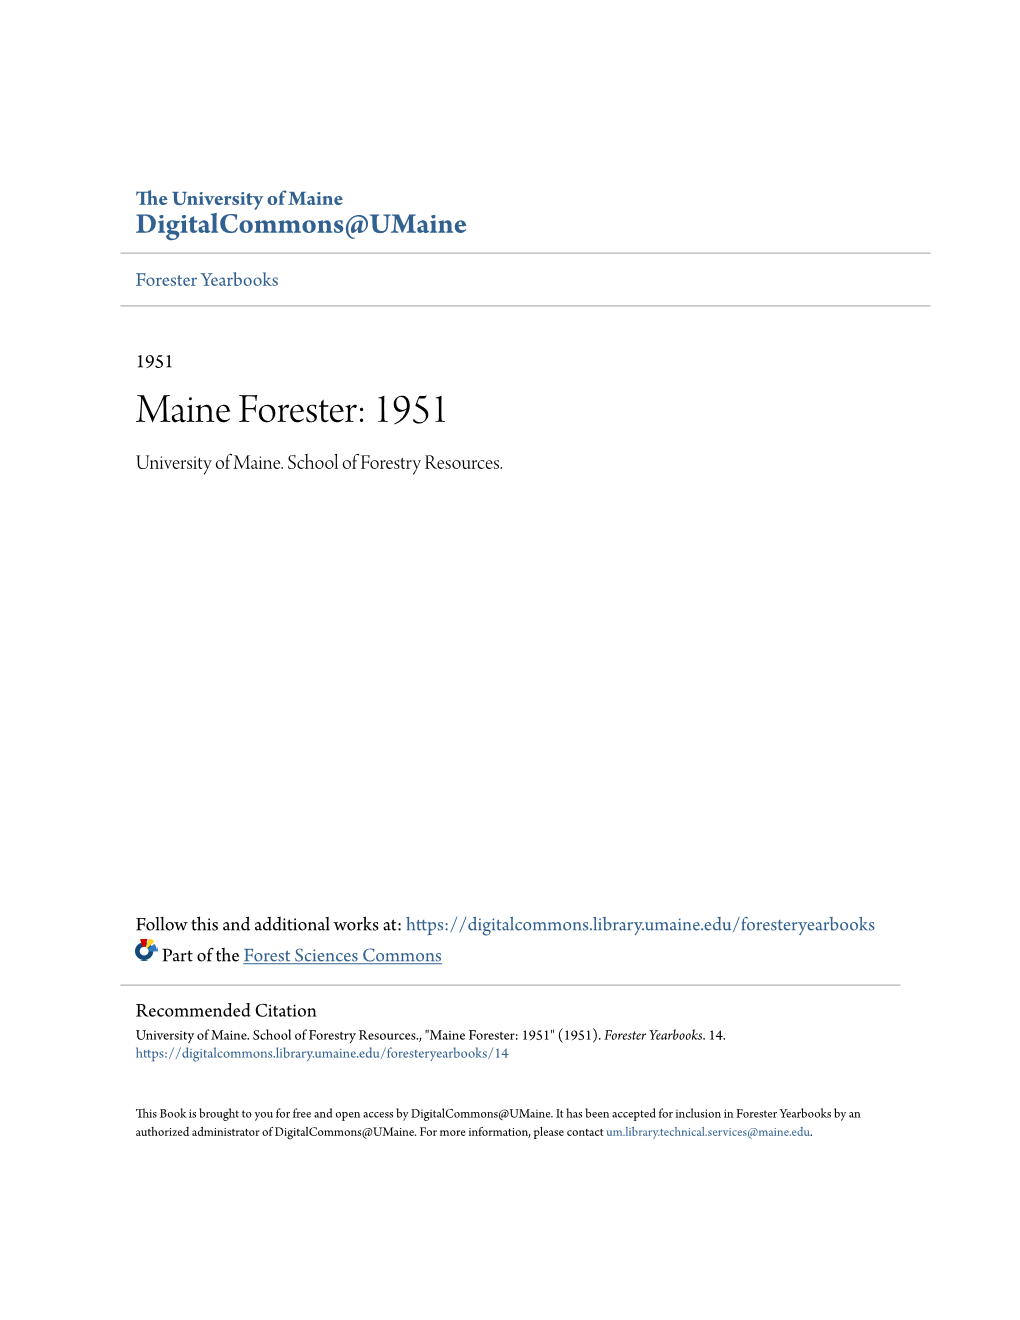 Maine Forester: 1951 University of Maine